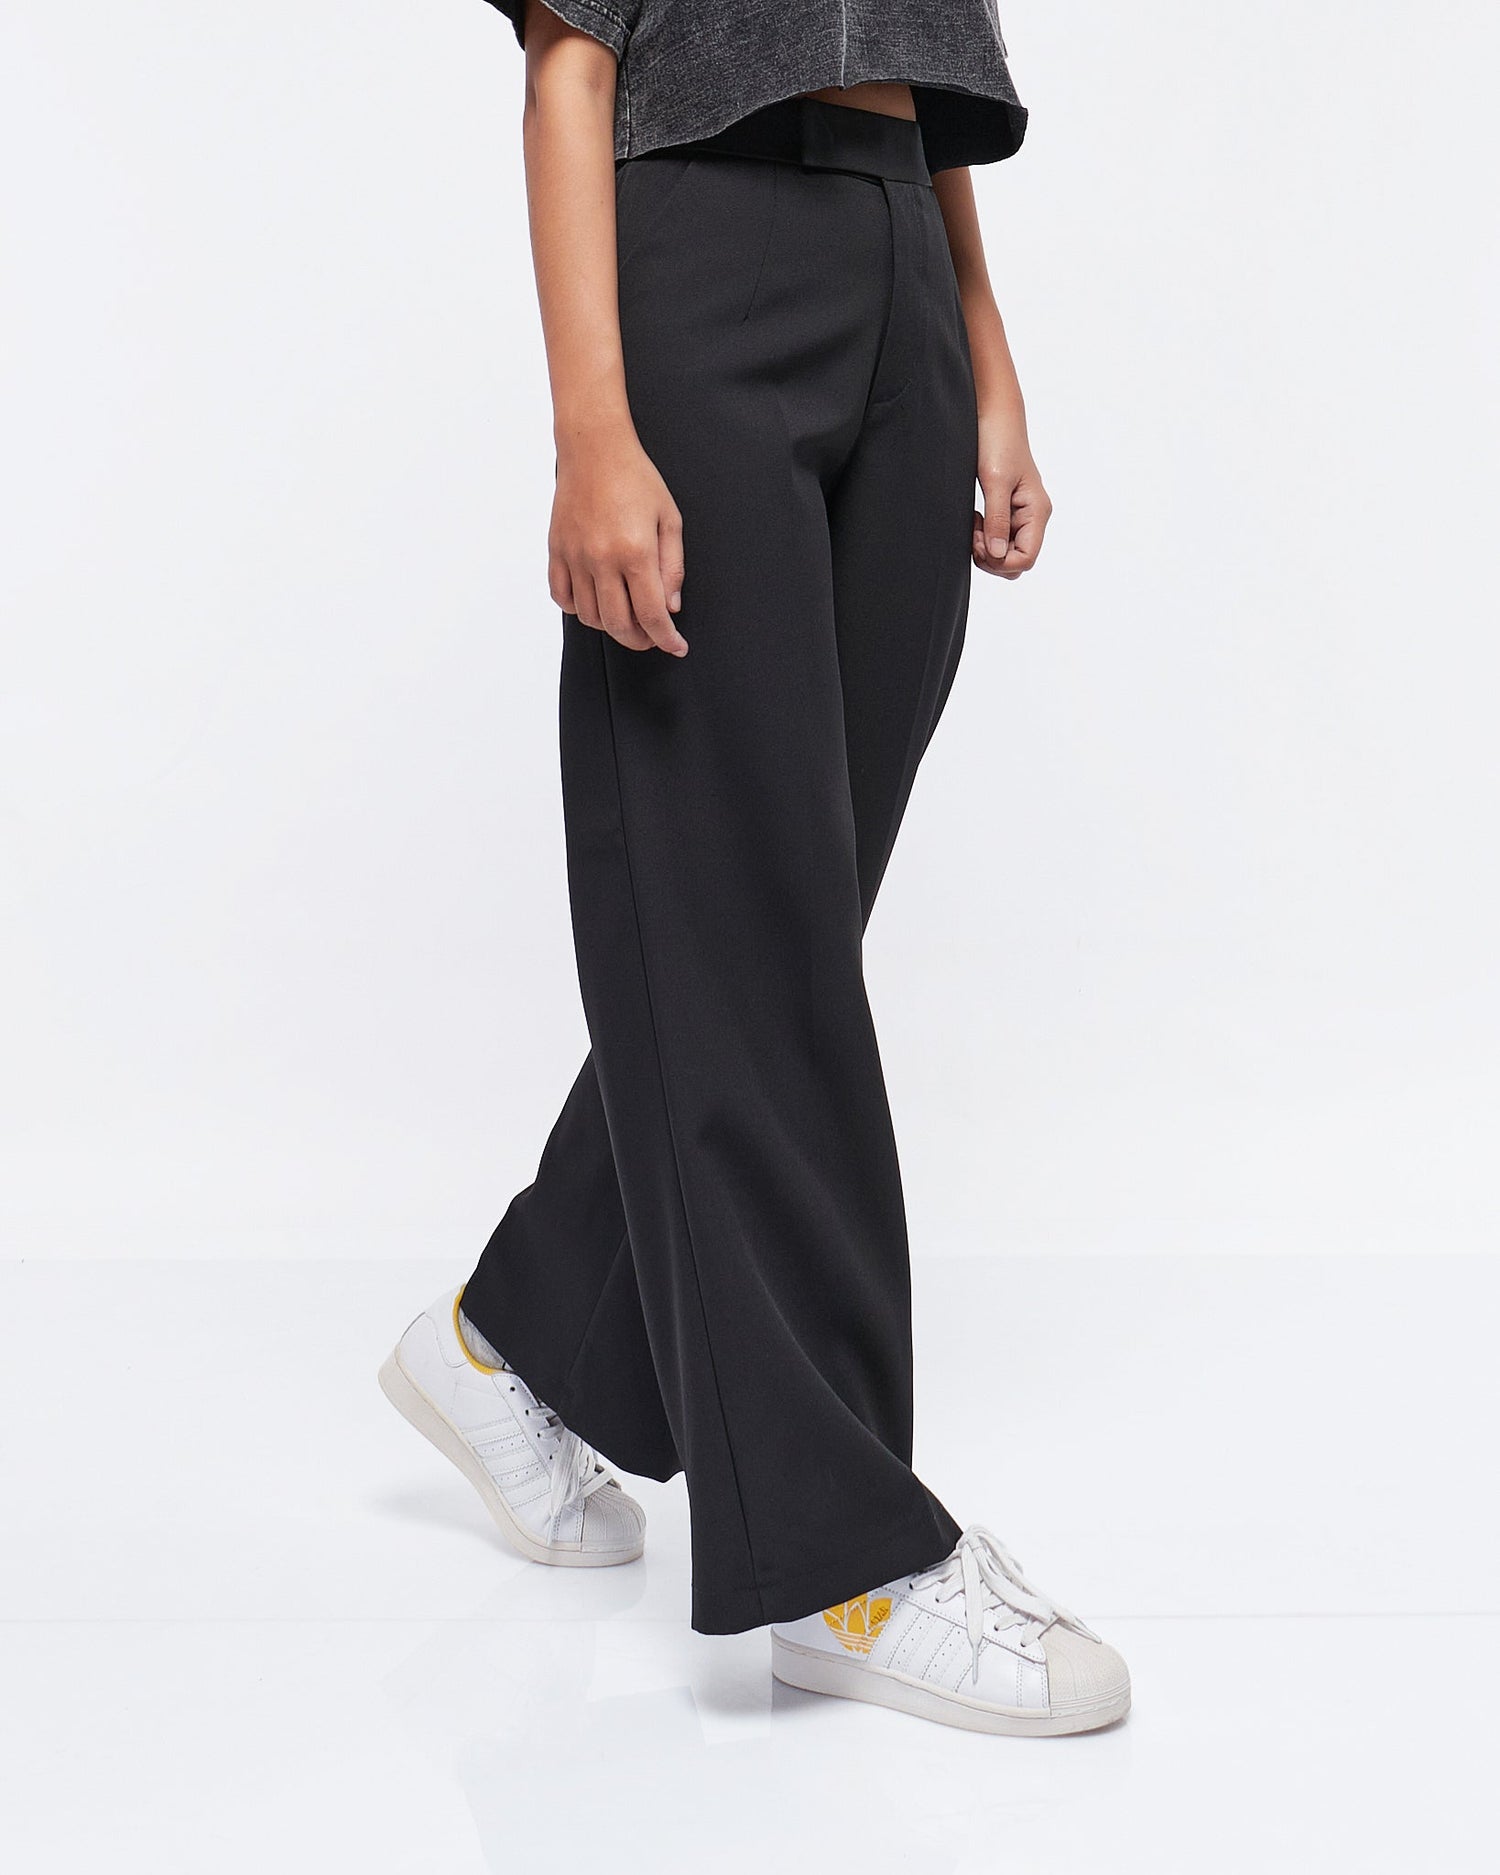 MOI OUTFIT-Casual Lady Wide Leg Pants 22.90